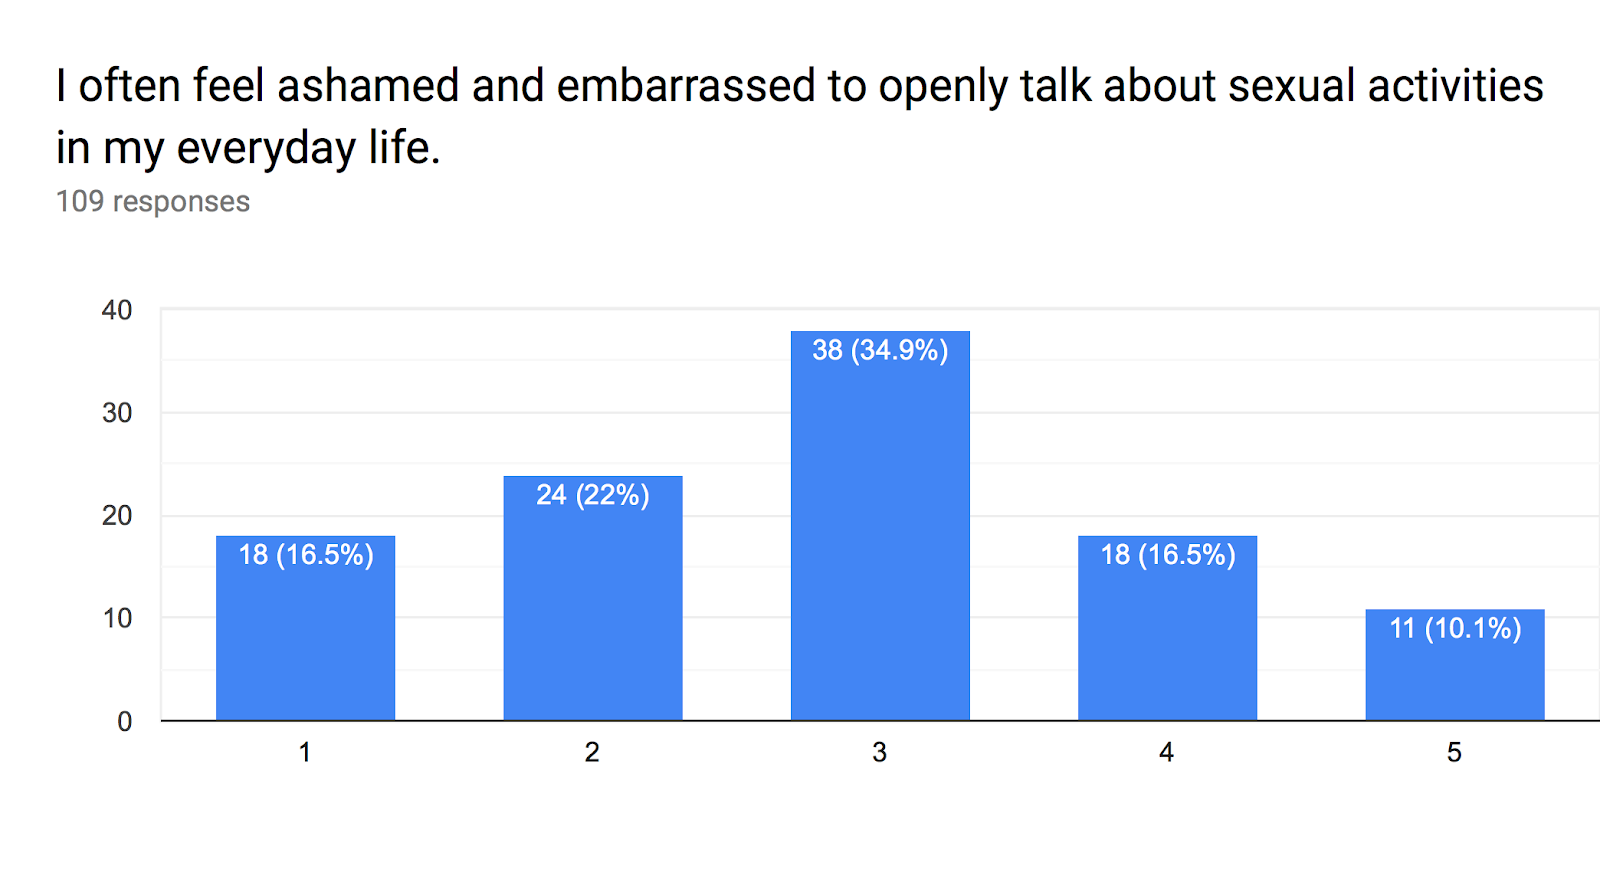 Forms response chart. Question title: I often feel ashamed and embarrassed to openly talk about sexual activities in my everyday life.  . Number of responses: 109 responses.